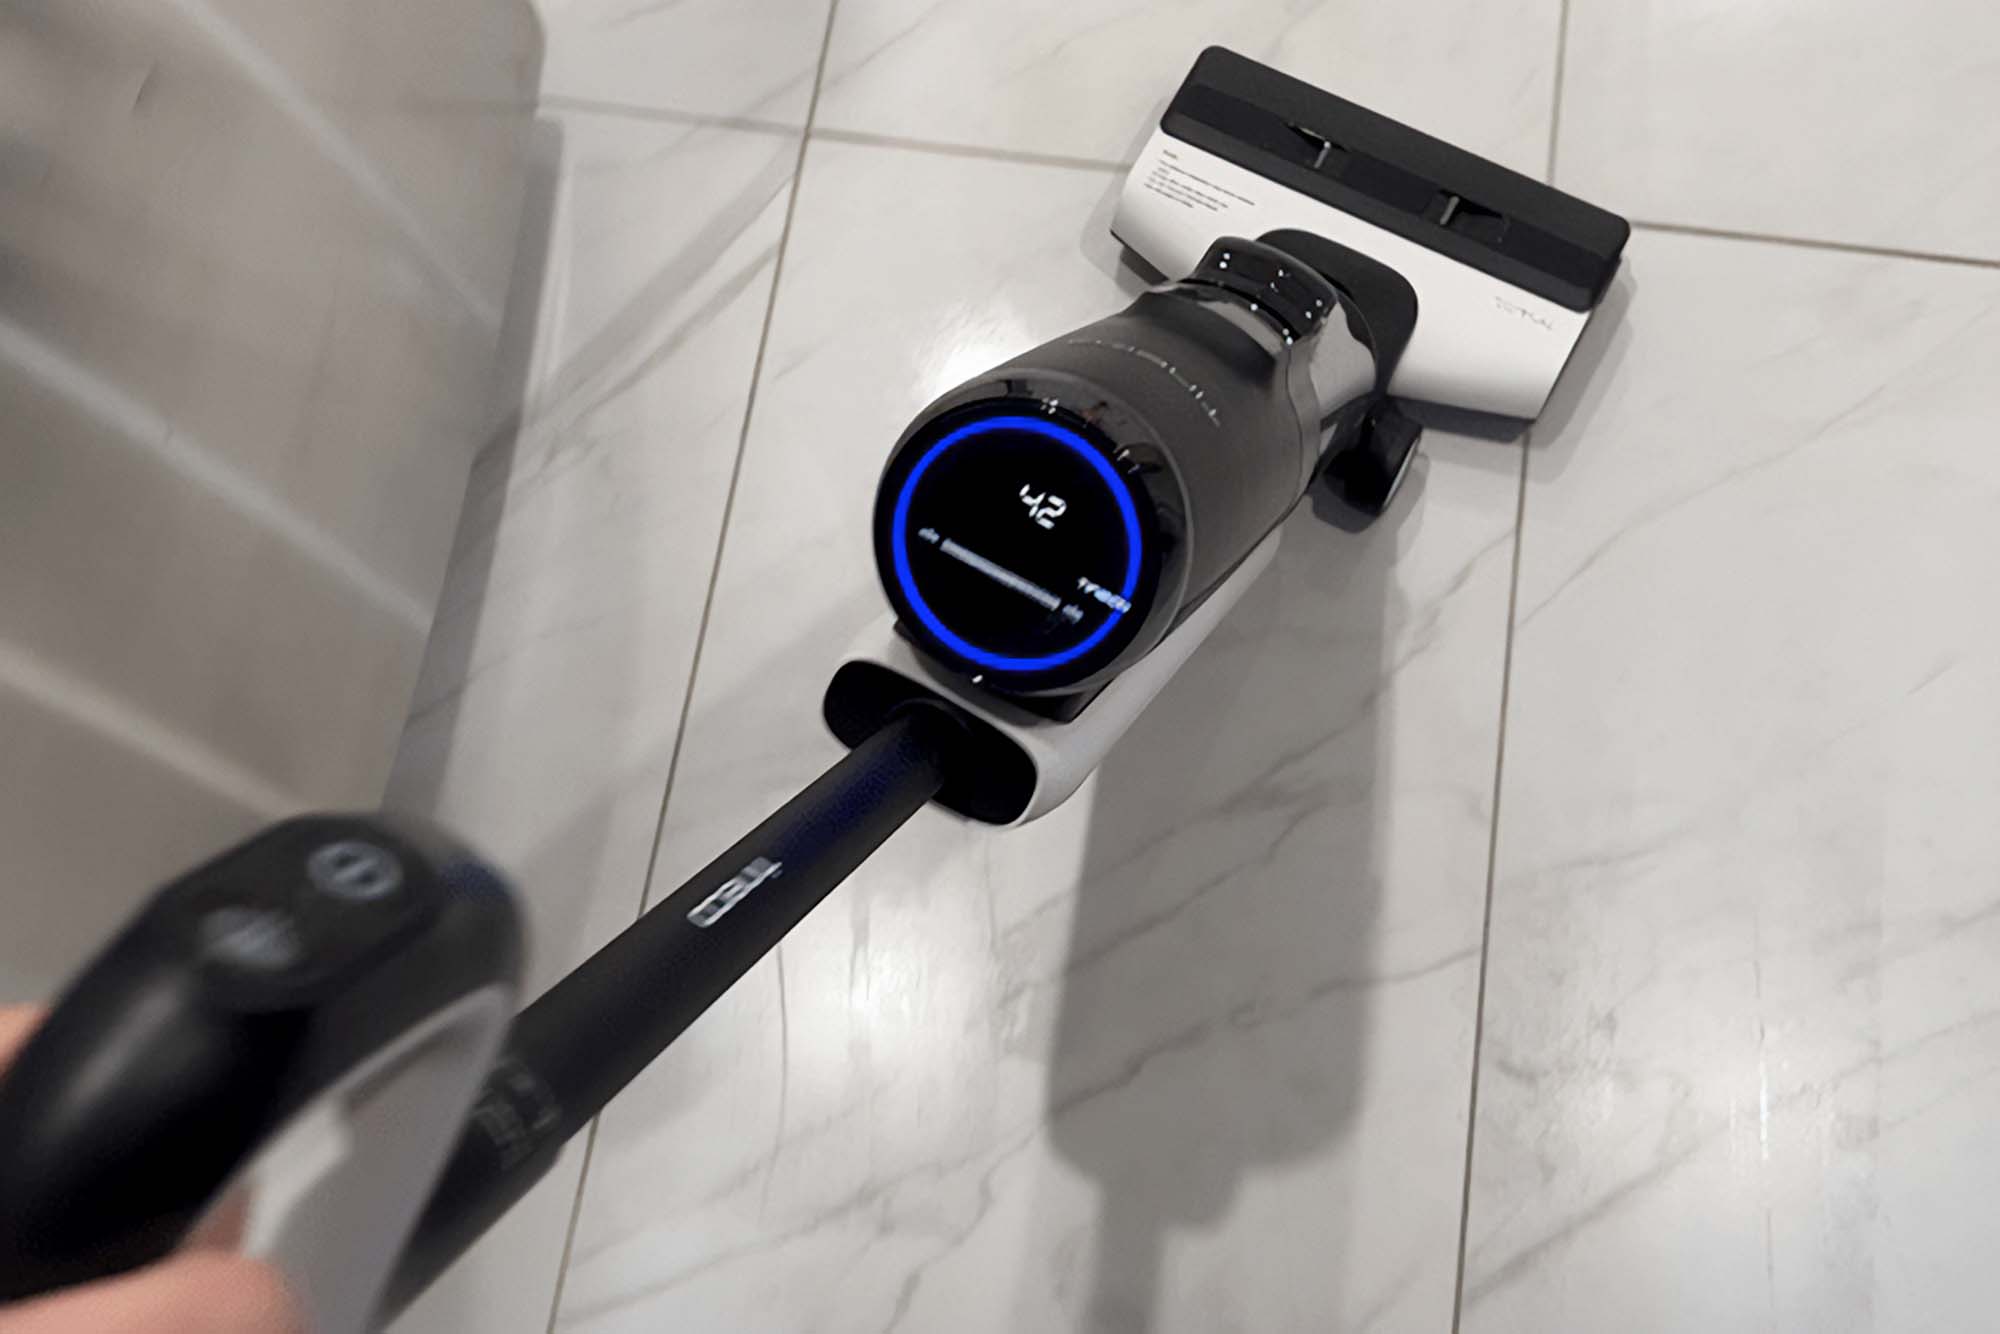 Tineco Floor One S5 Review: Dual Vacuum Mop With Power Scrub